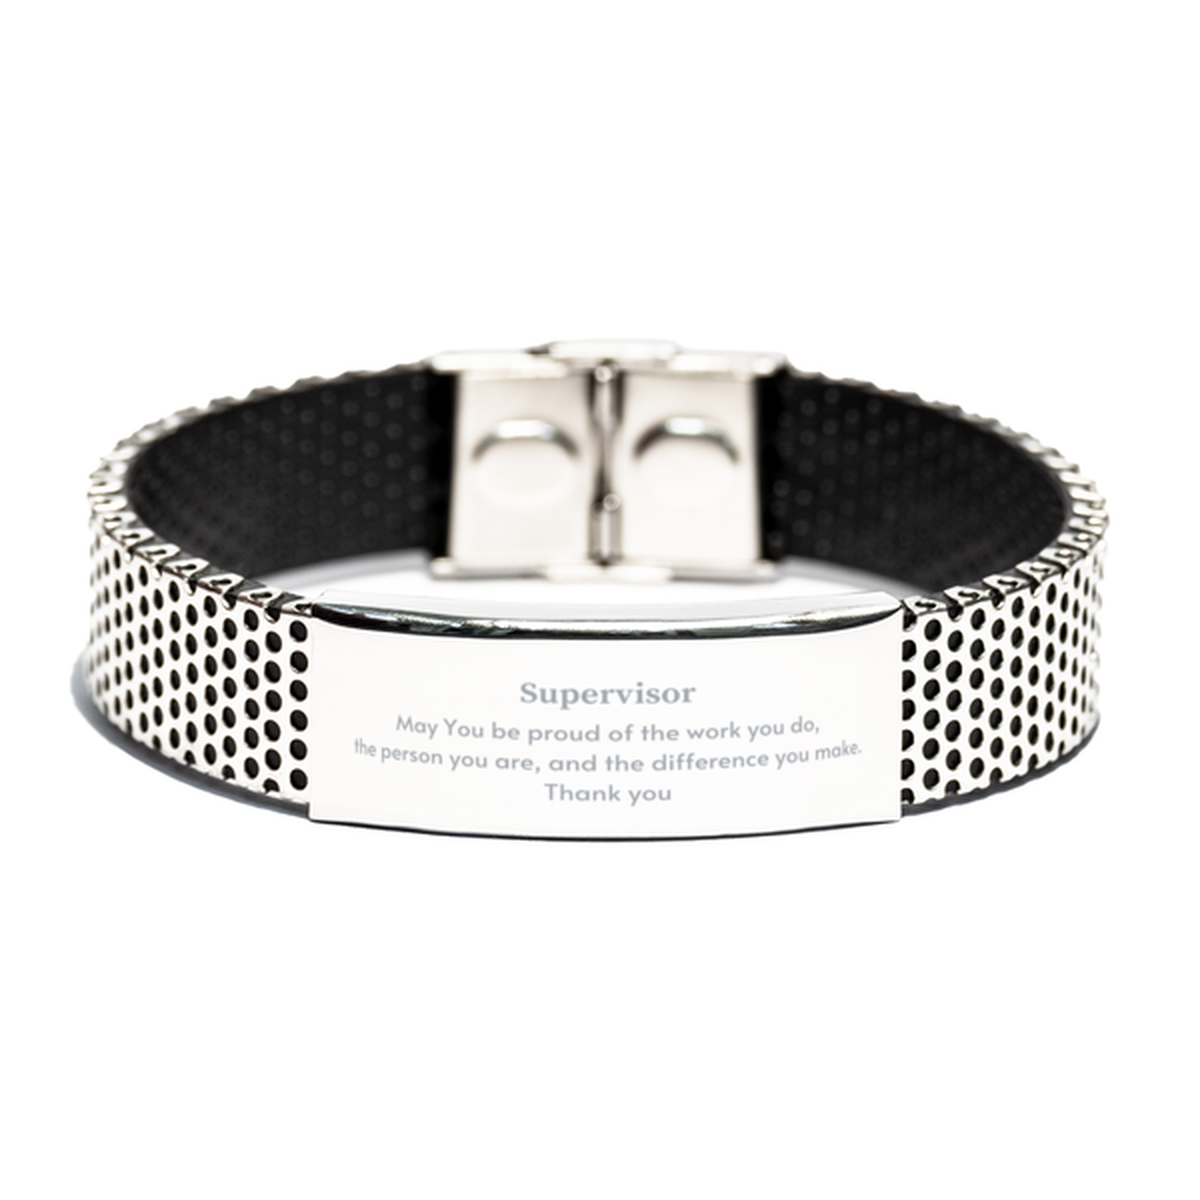 Heartwarming Stainless Steel Bracelet Retirement Coworkers Gifts for Supervisor, Supervisor May You be proud of the work you do, the person you are Gifts for Boss Men Women Friends